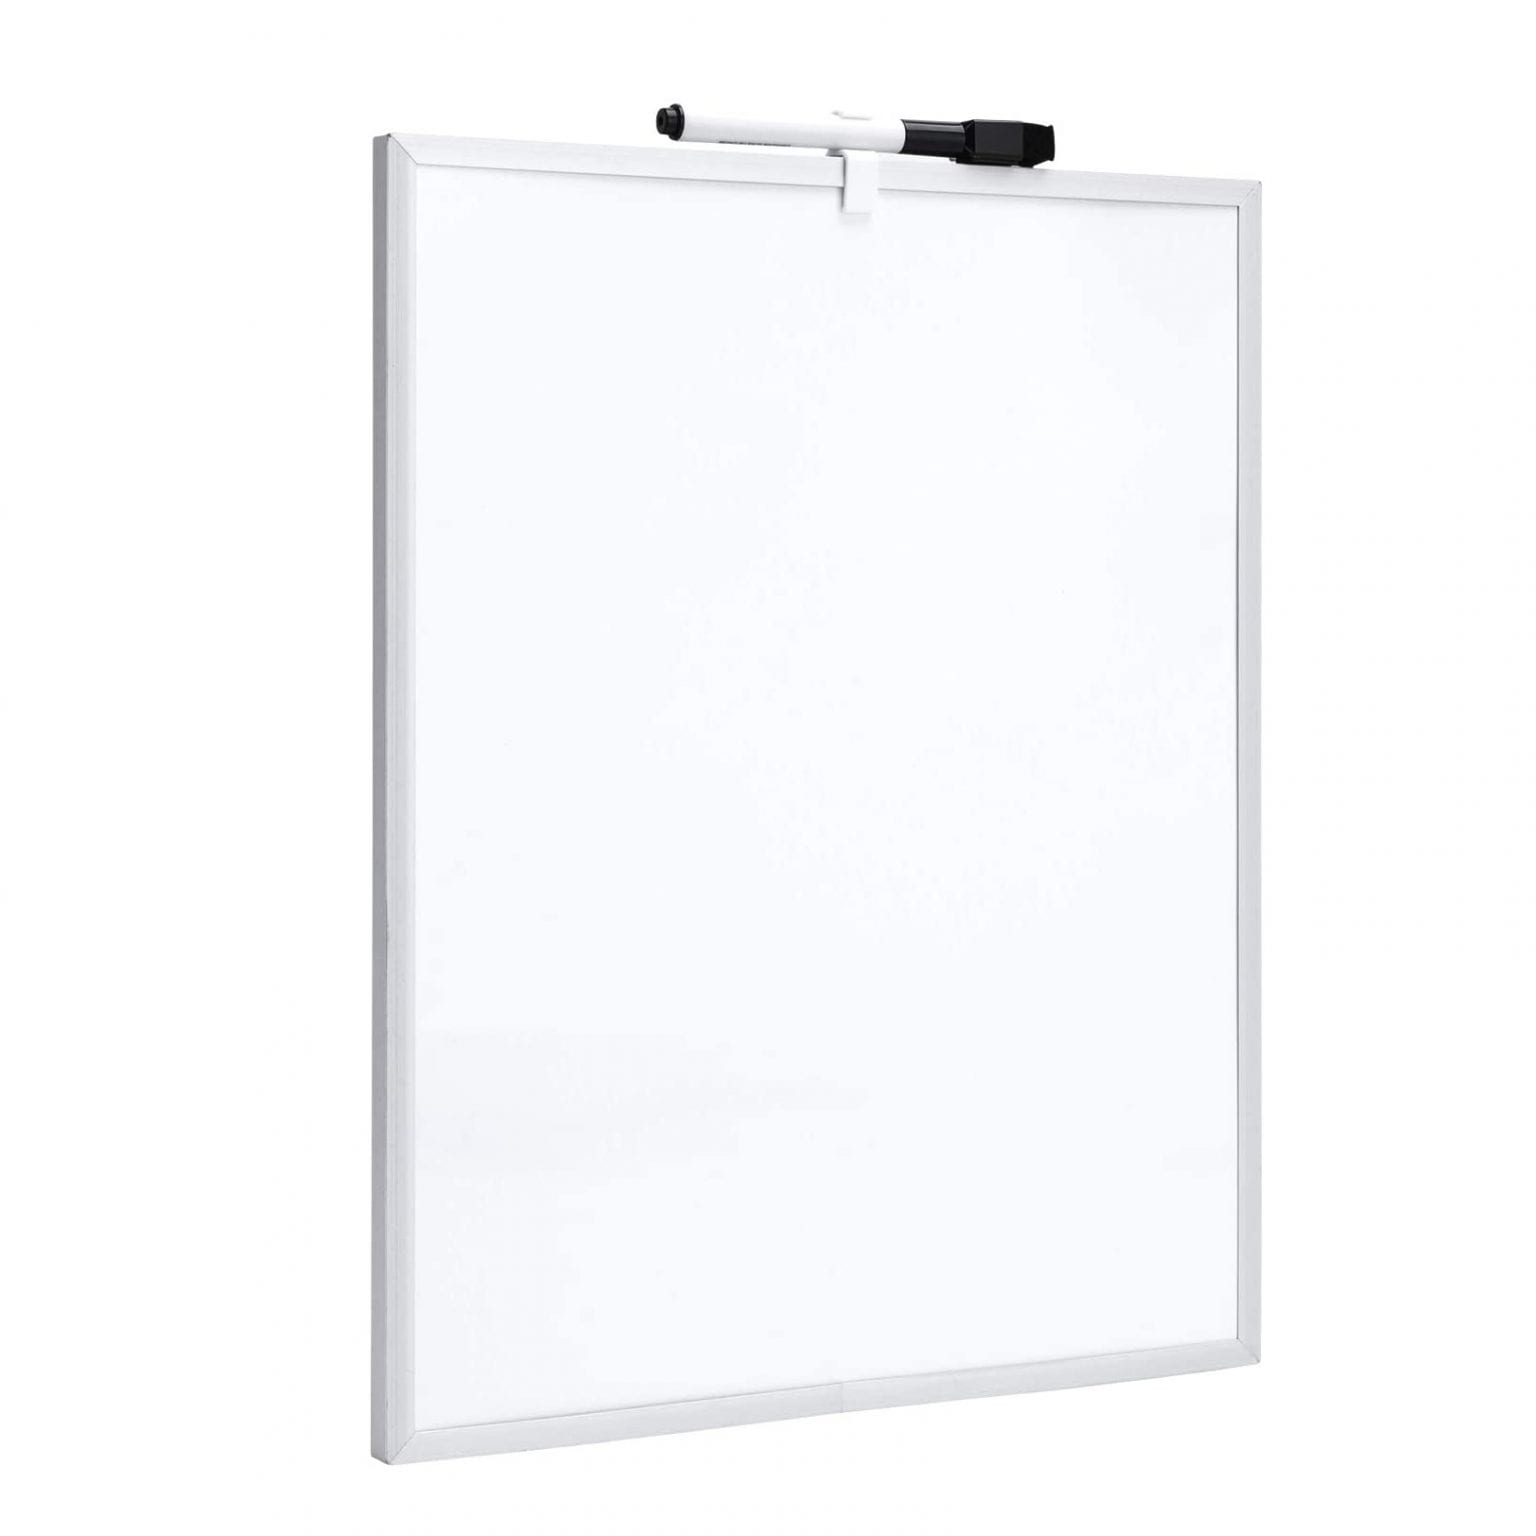 what are the types of writing board